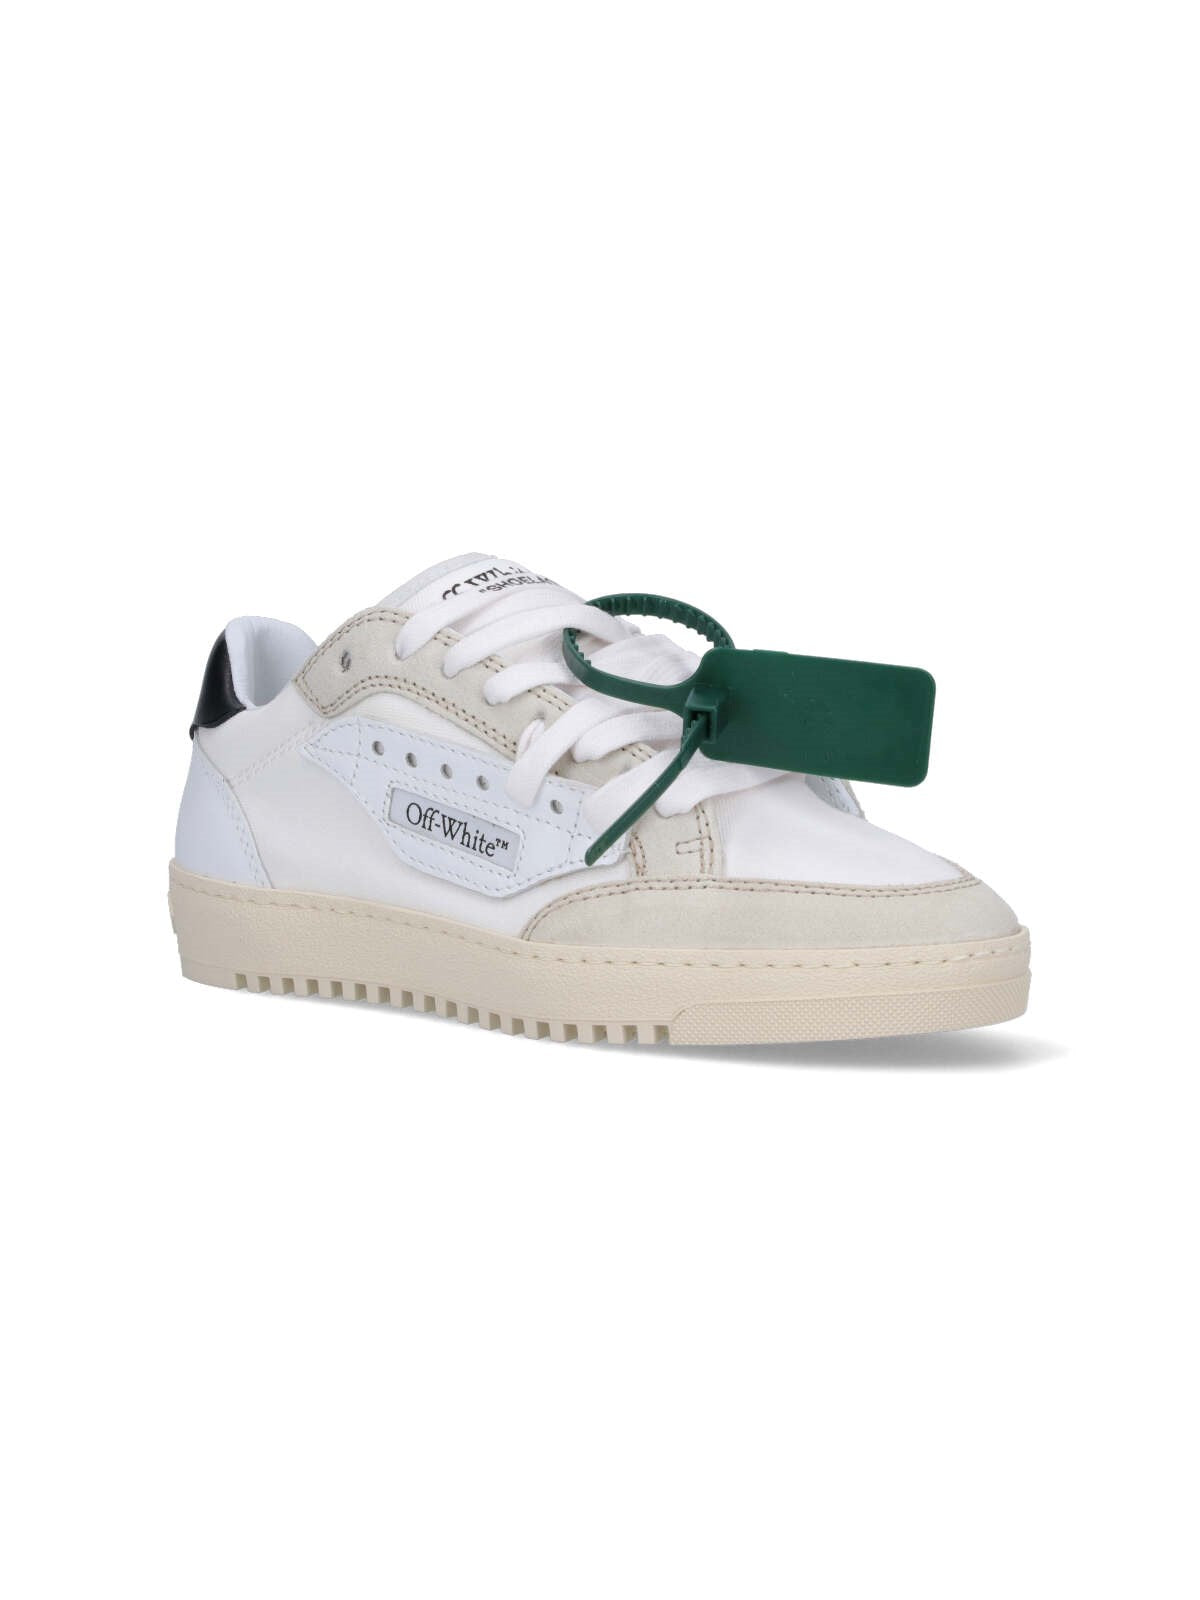 off-white "5.0" sneakers